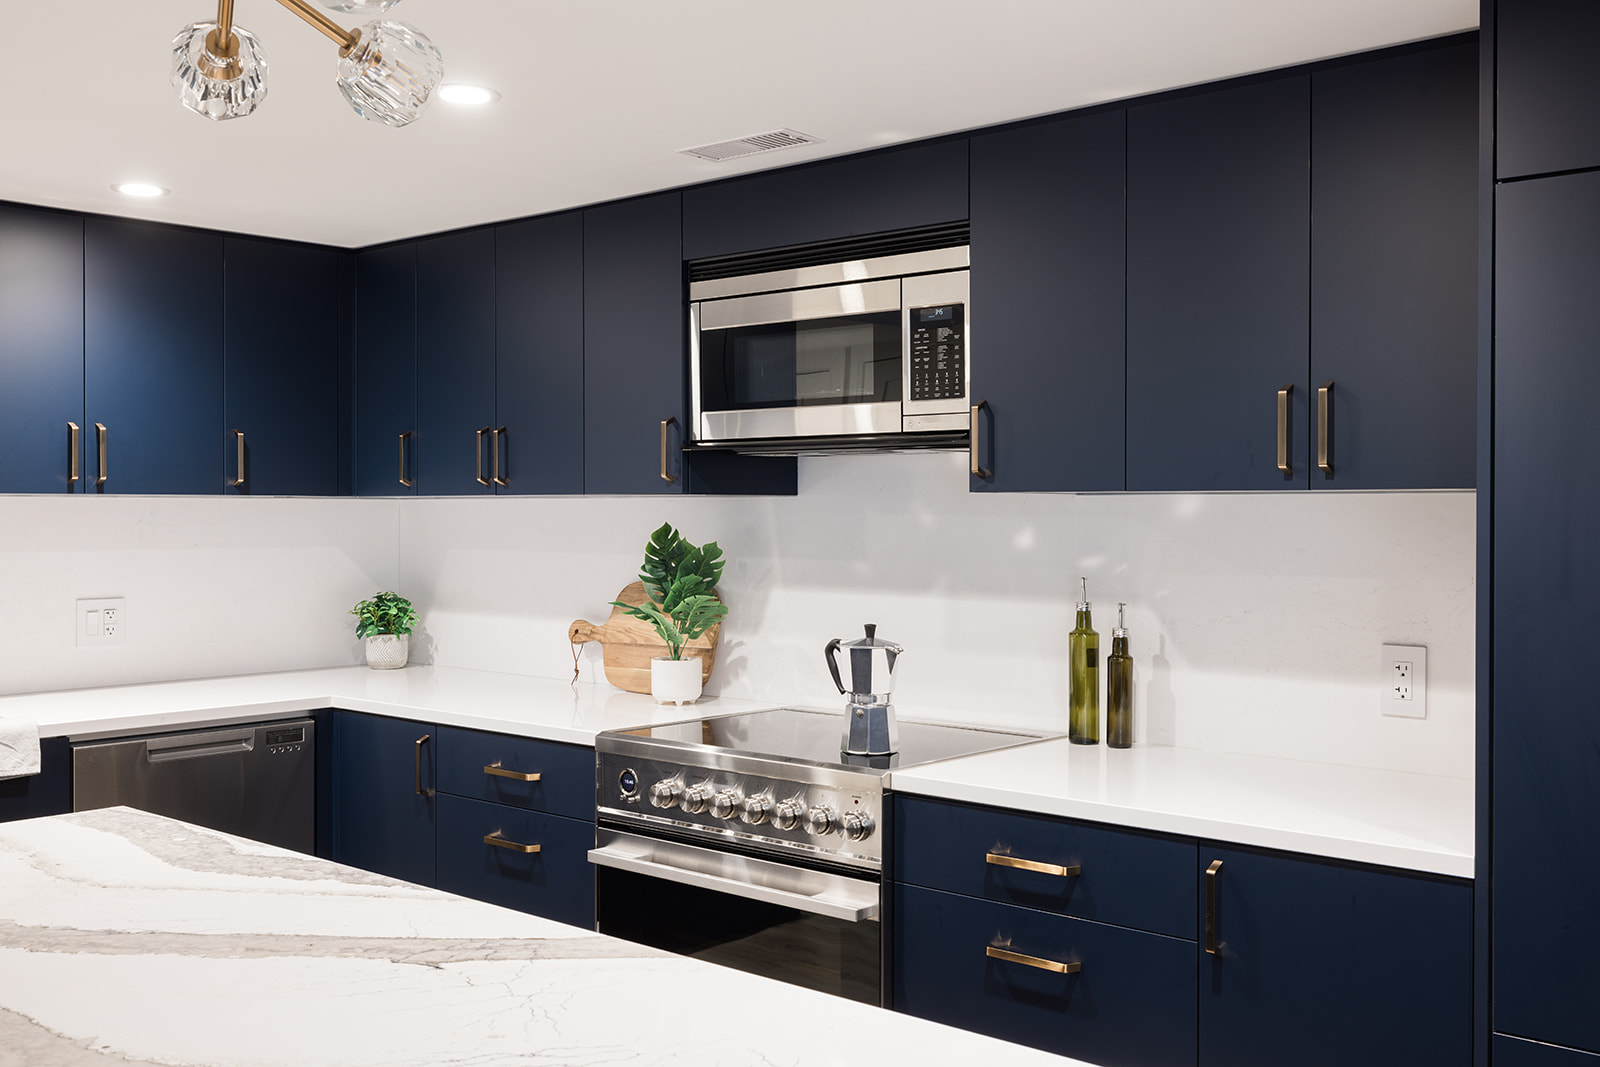 Microwave and oven in downtown Toronto luxury kitchen condo renovation with dark blue cabinets